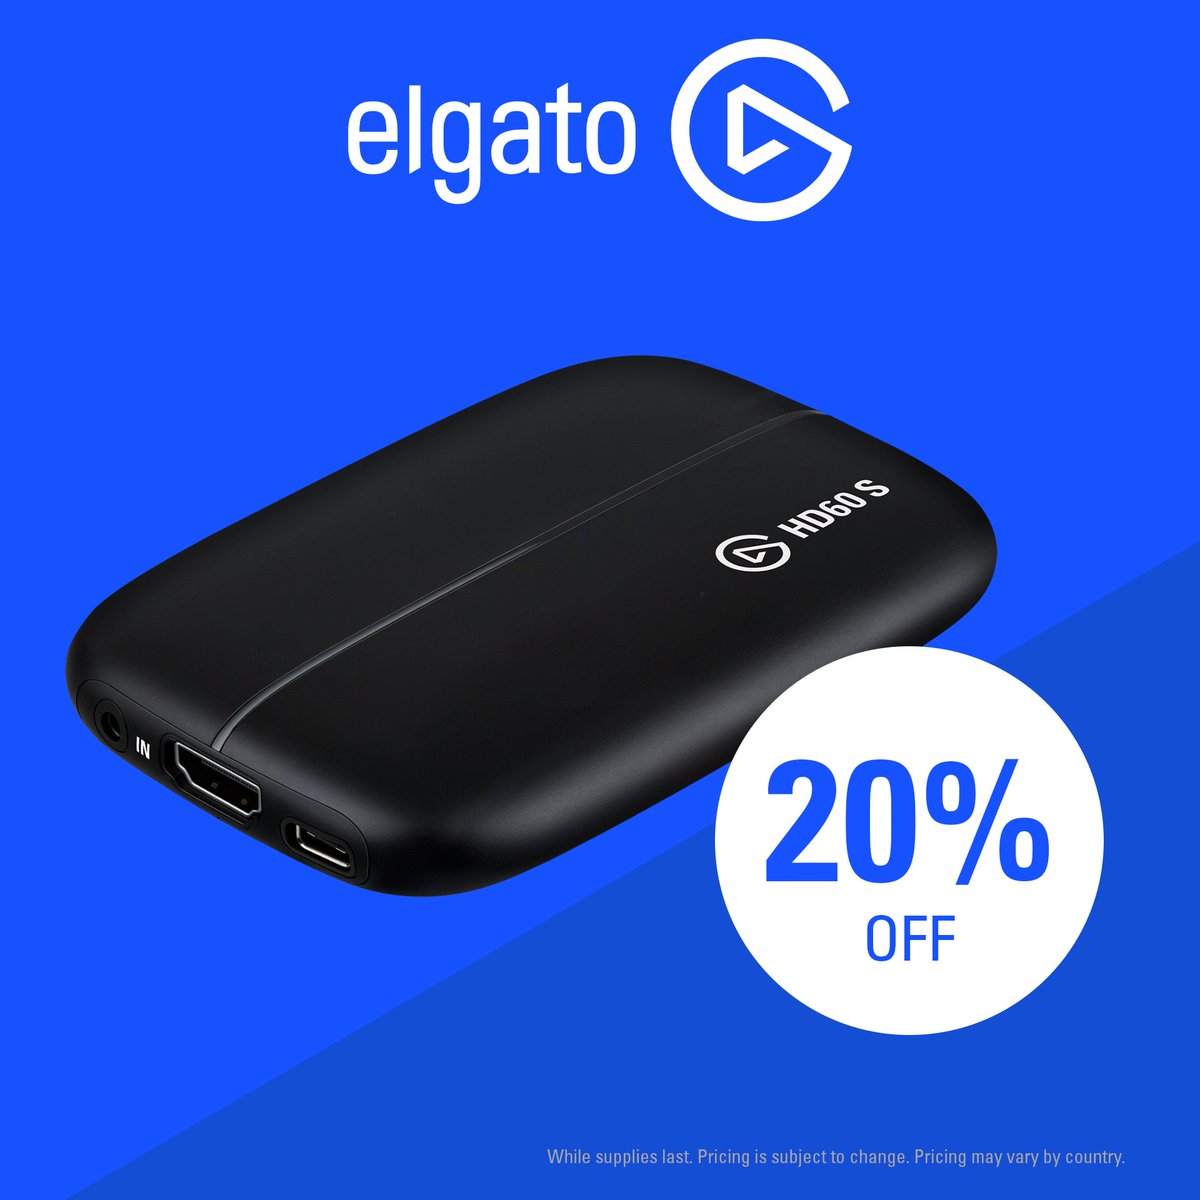 Elgato On Twitter We Re Kicking Off Black Friday Early With A Sale On Hd60 S 1080p60 Quality Capture Ps5 Xbox Series X S Switch And More Ultra Low Latency